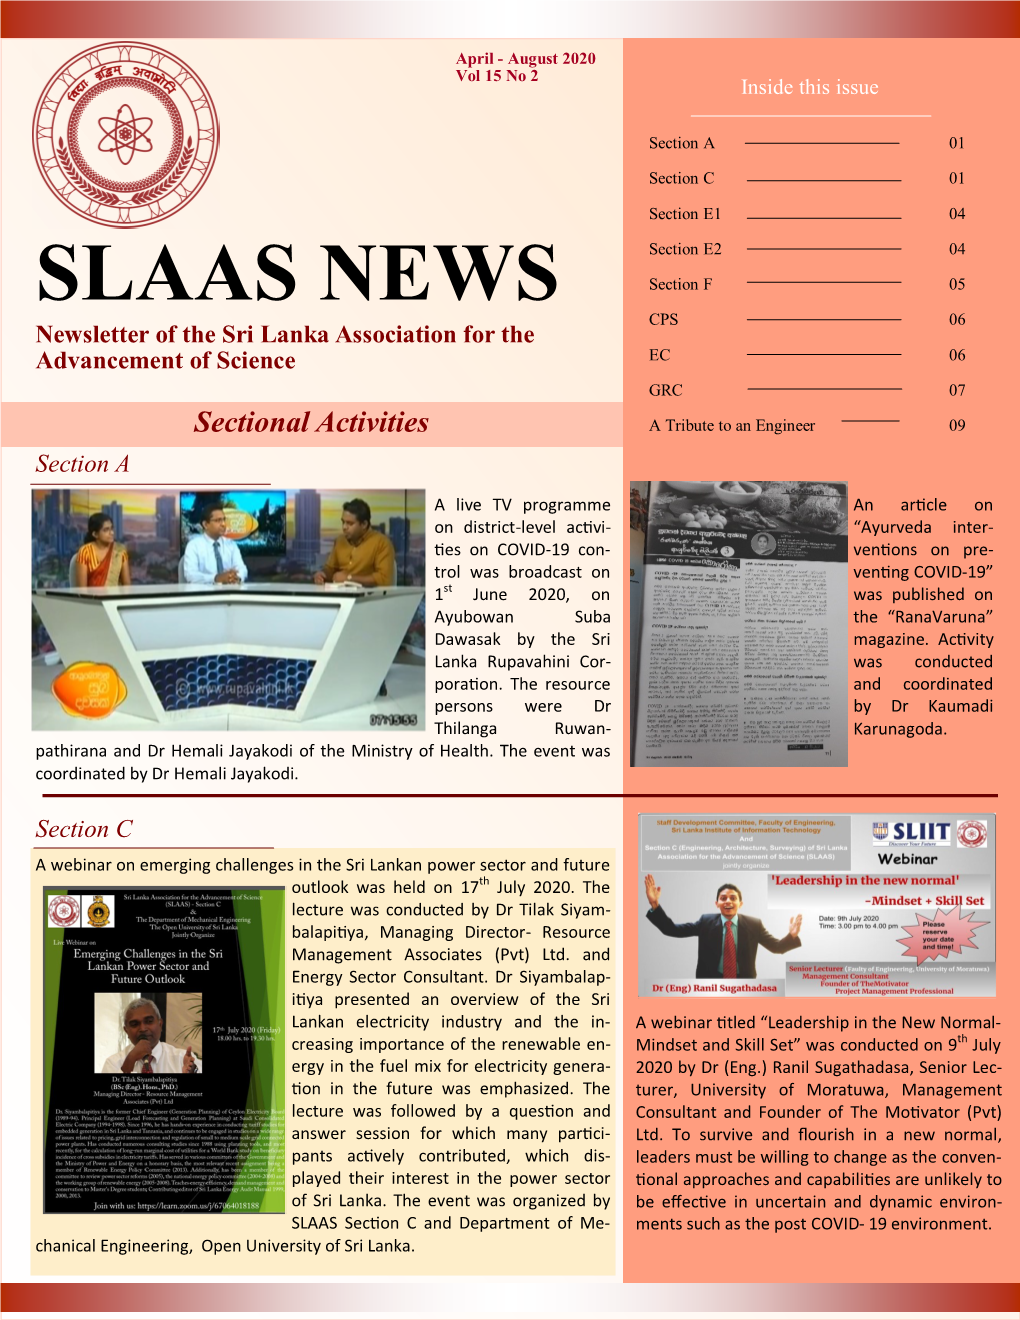 SLAAS NEWS CPS 06 Newsletter of the Sri Lanka Association for the EC 06 Advancement of Science GRC 07